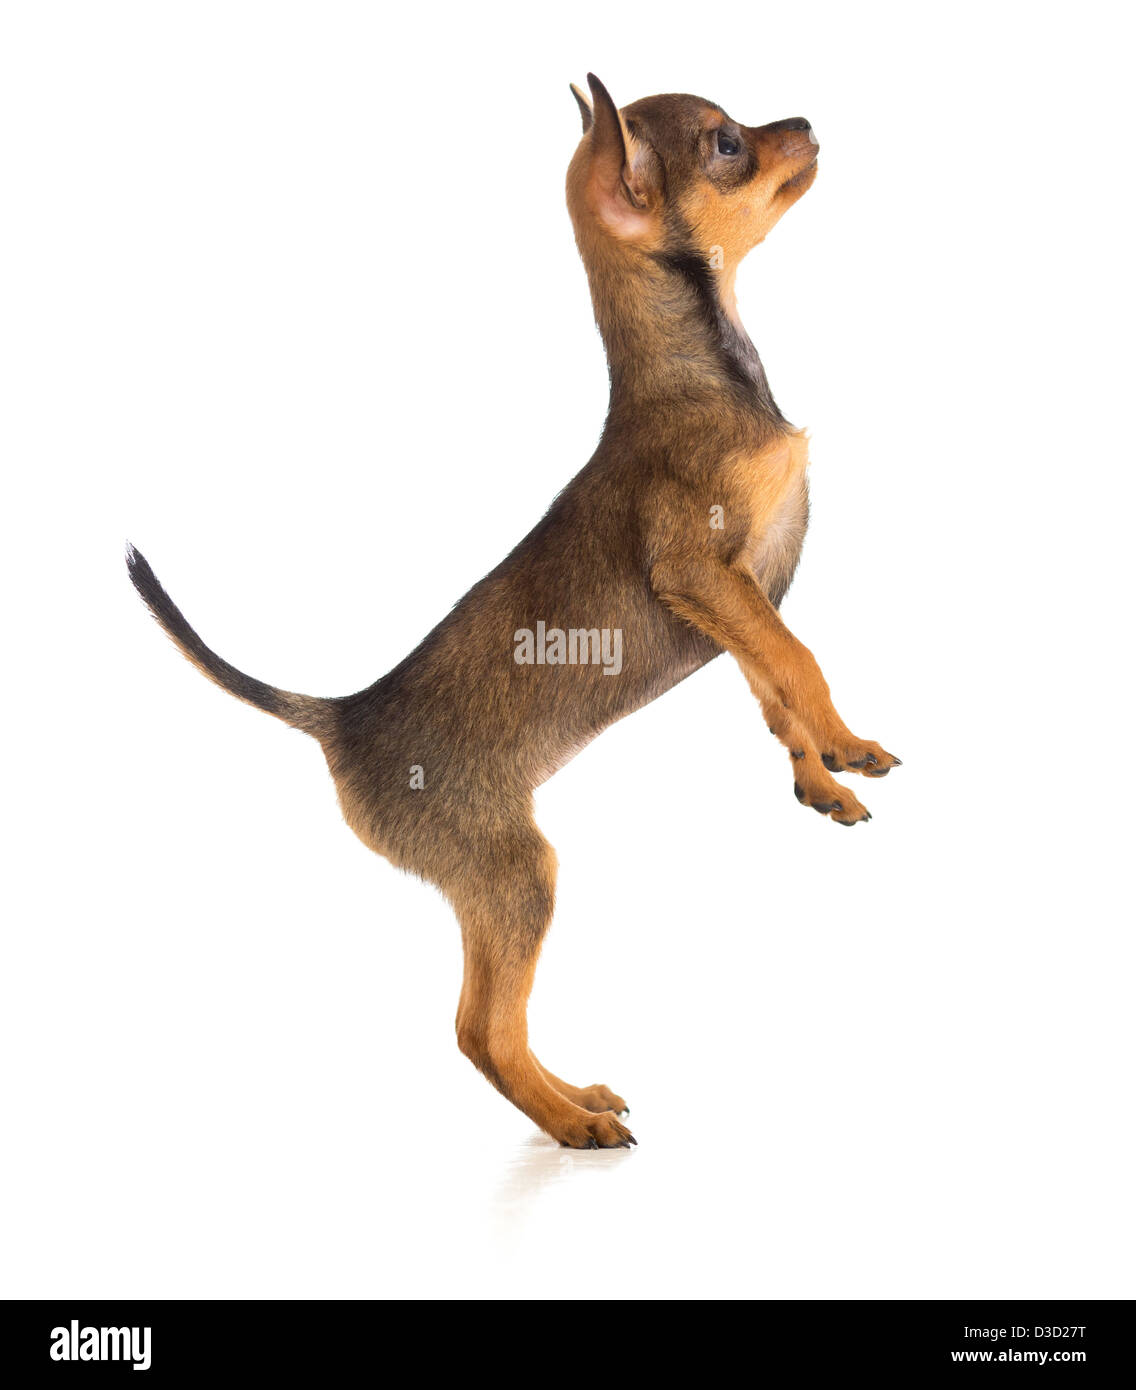 Standing dog side view. Russian toy terrier Stock Photo